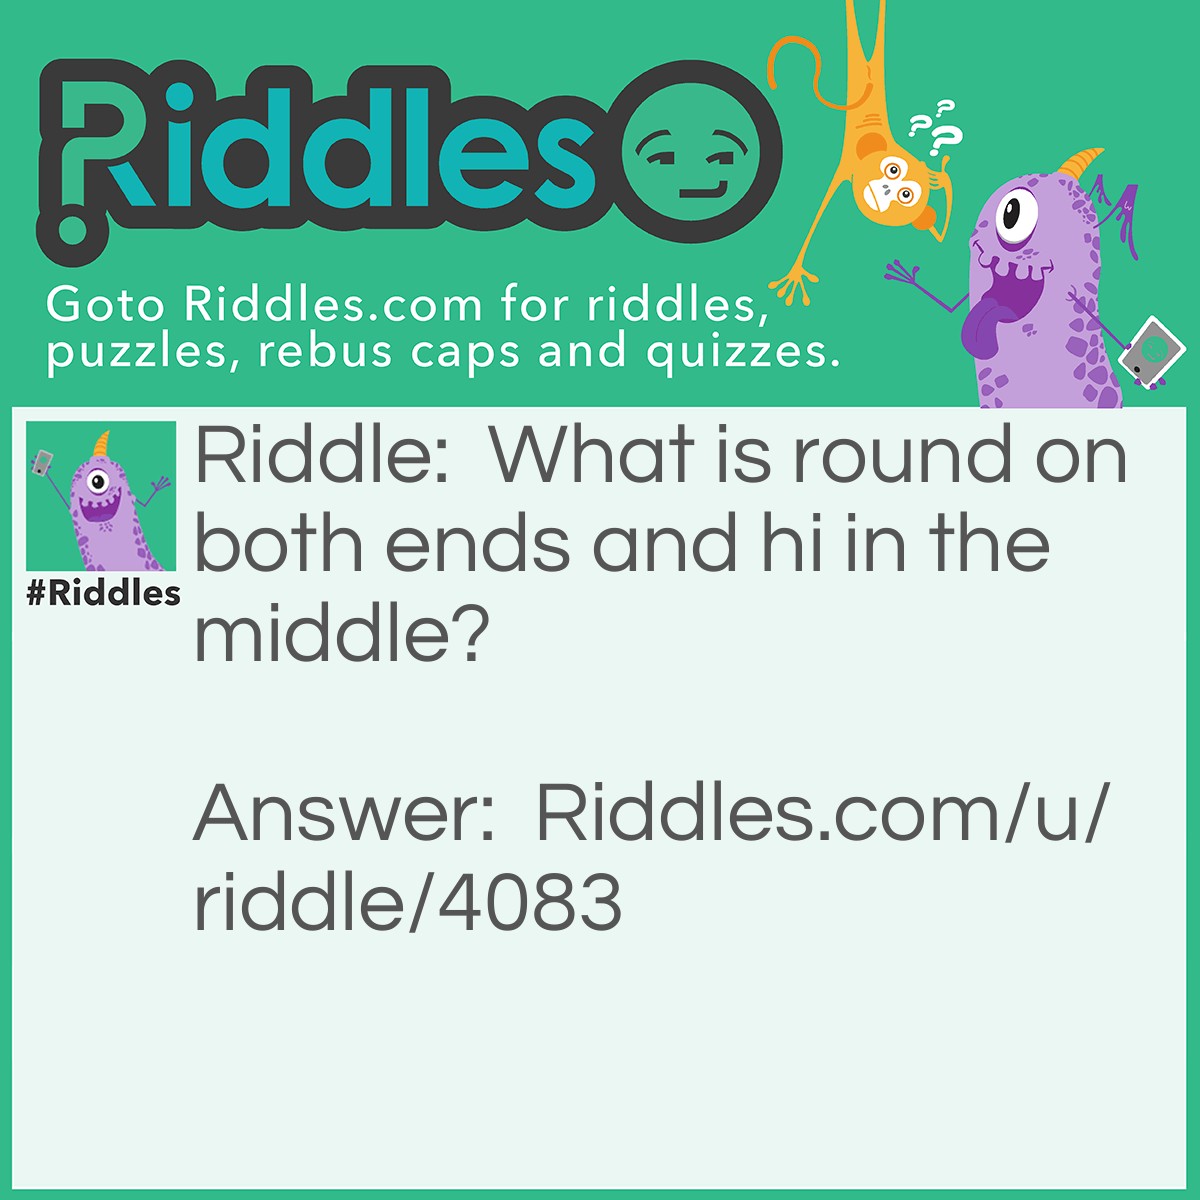 Riddle: What is round on both ends and hi in the middle? Answer: Ohio- the two O's are round with a 'hi' in the middle.